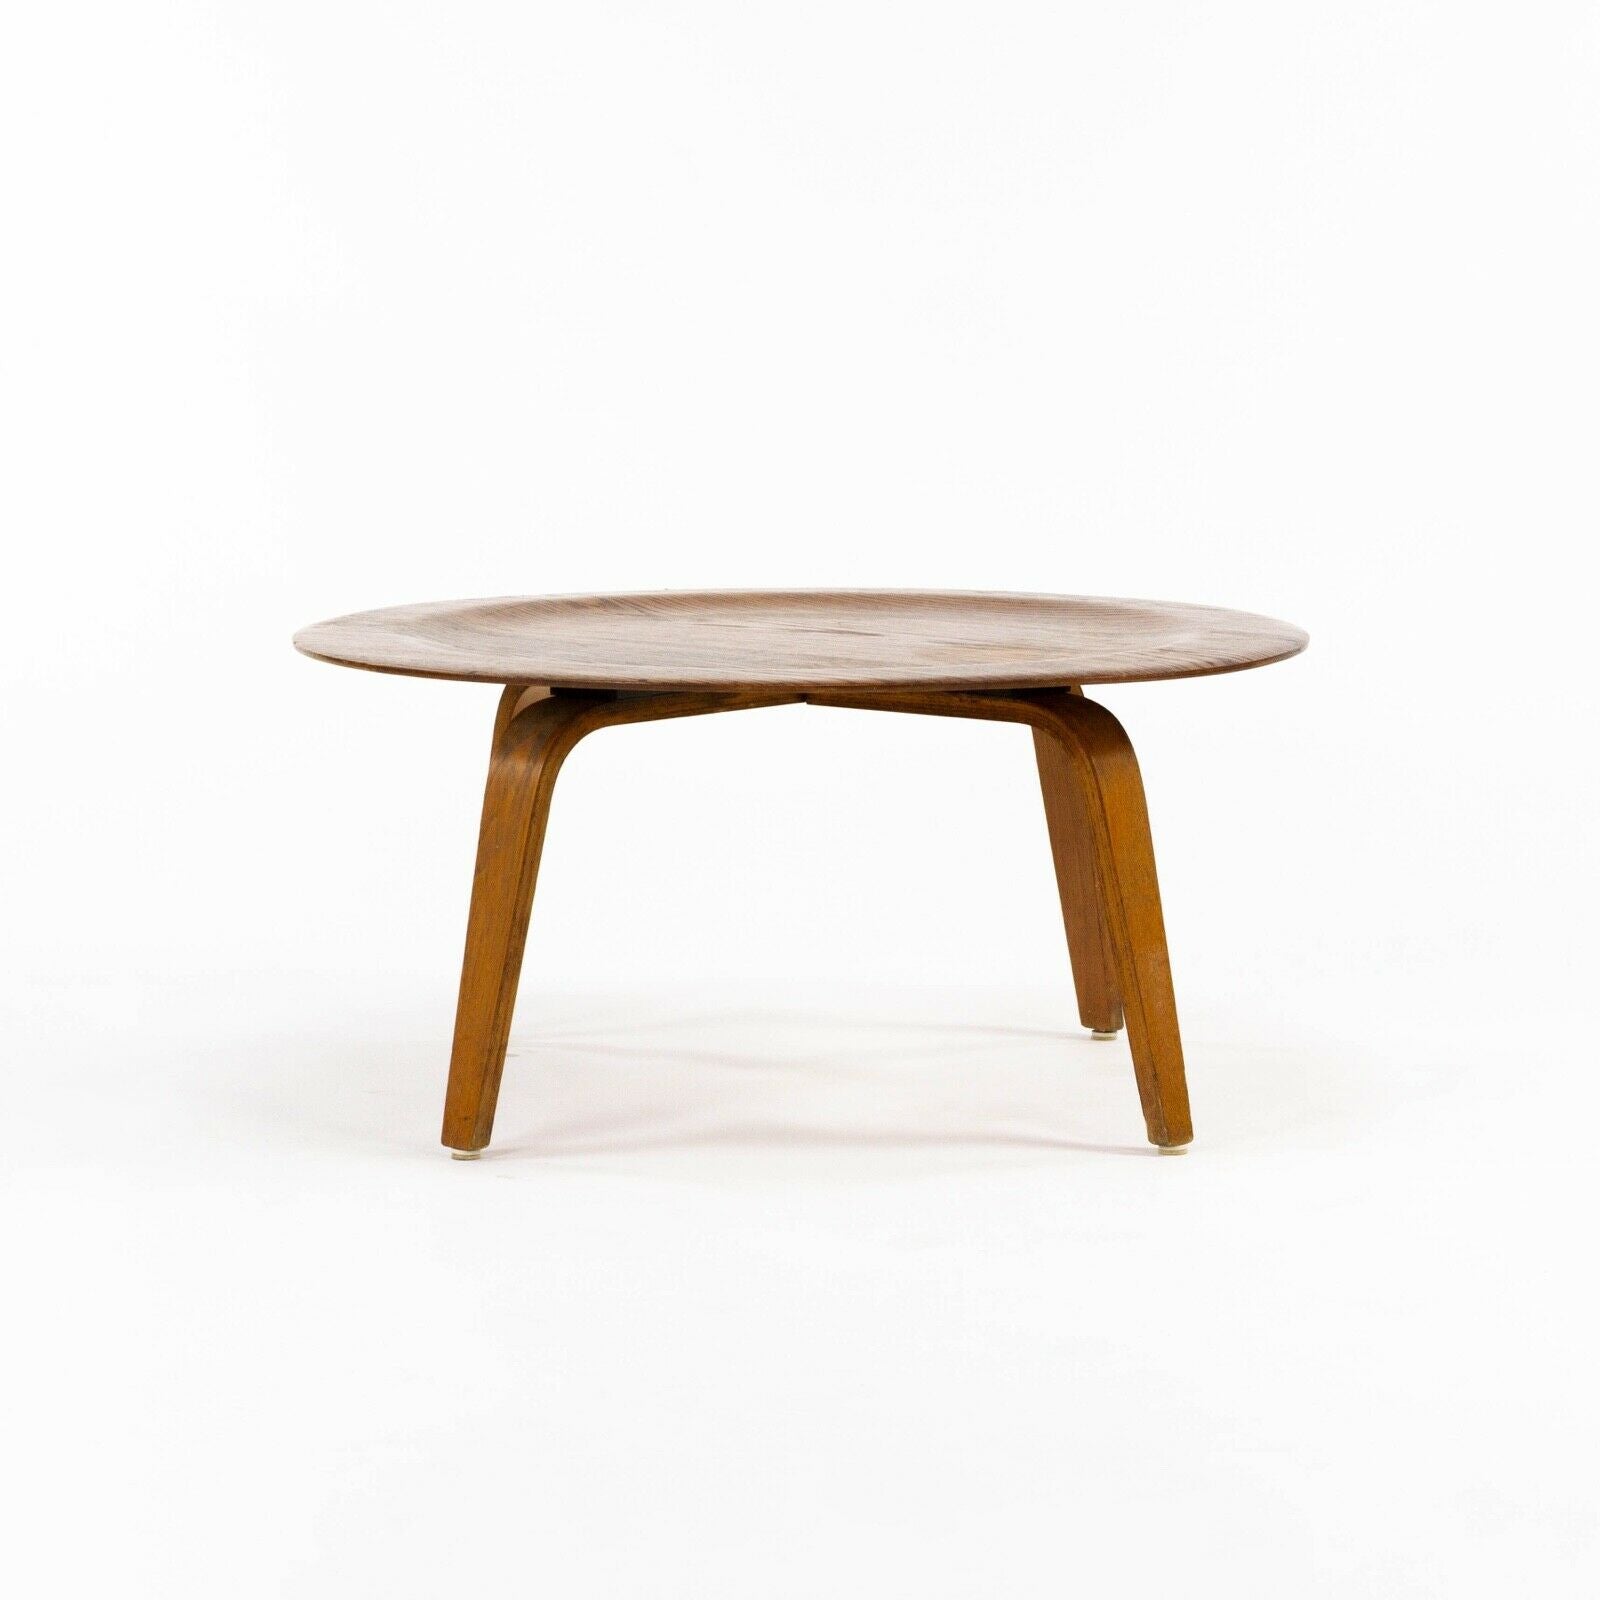 SOLD 1950s Herman Miller Ray and Charles Eames CTW Coffee Table Wood in Calico Ash